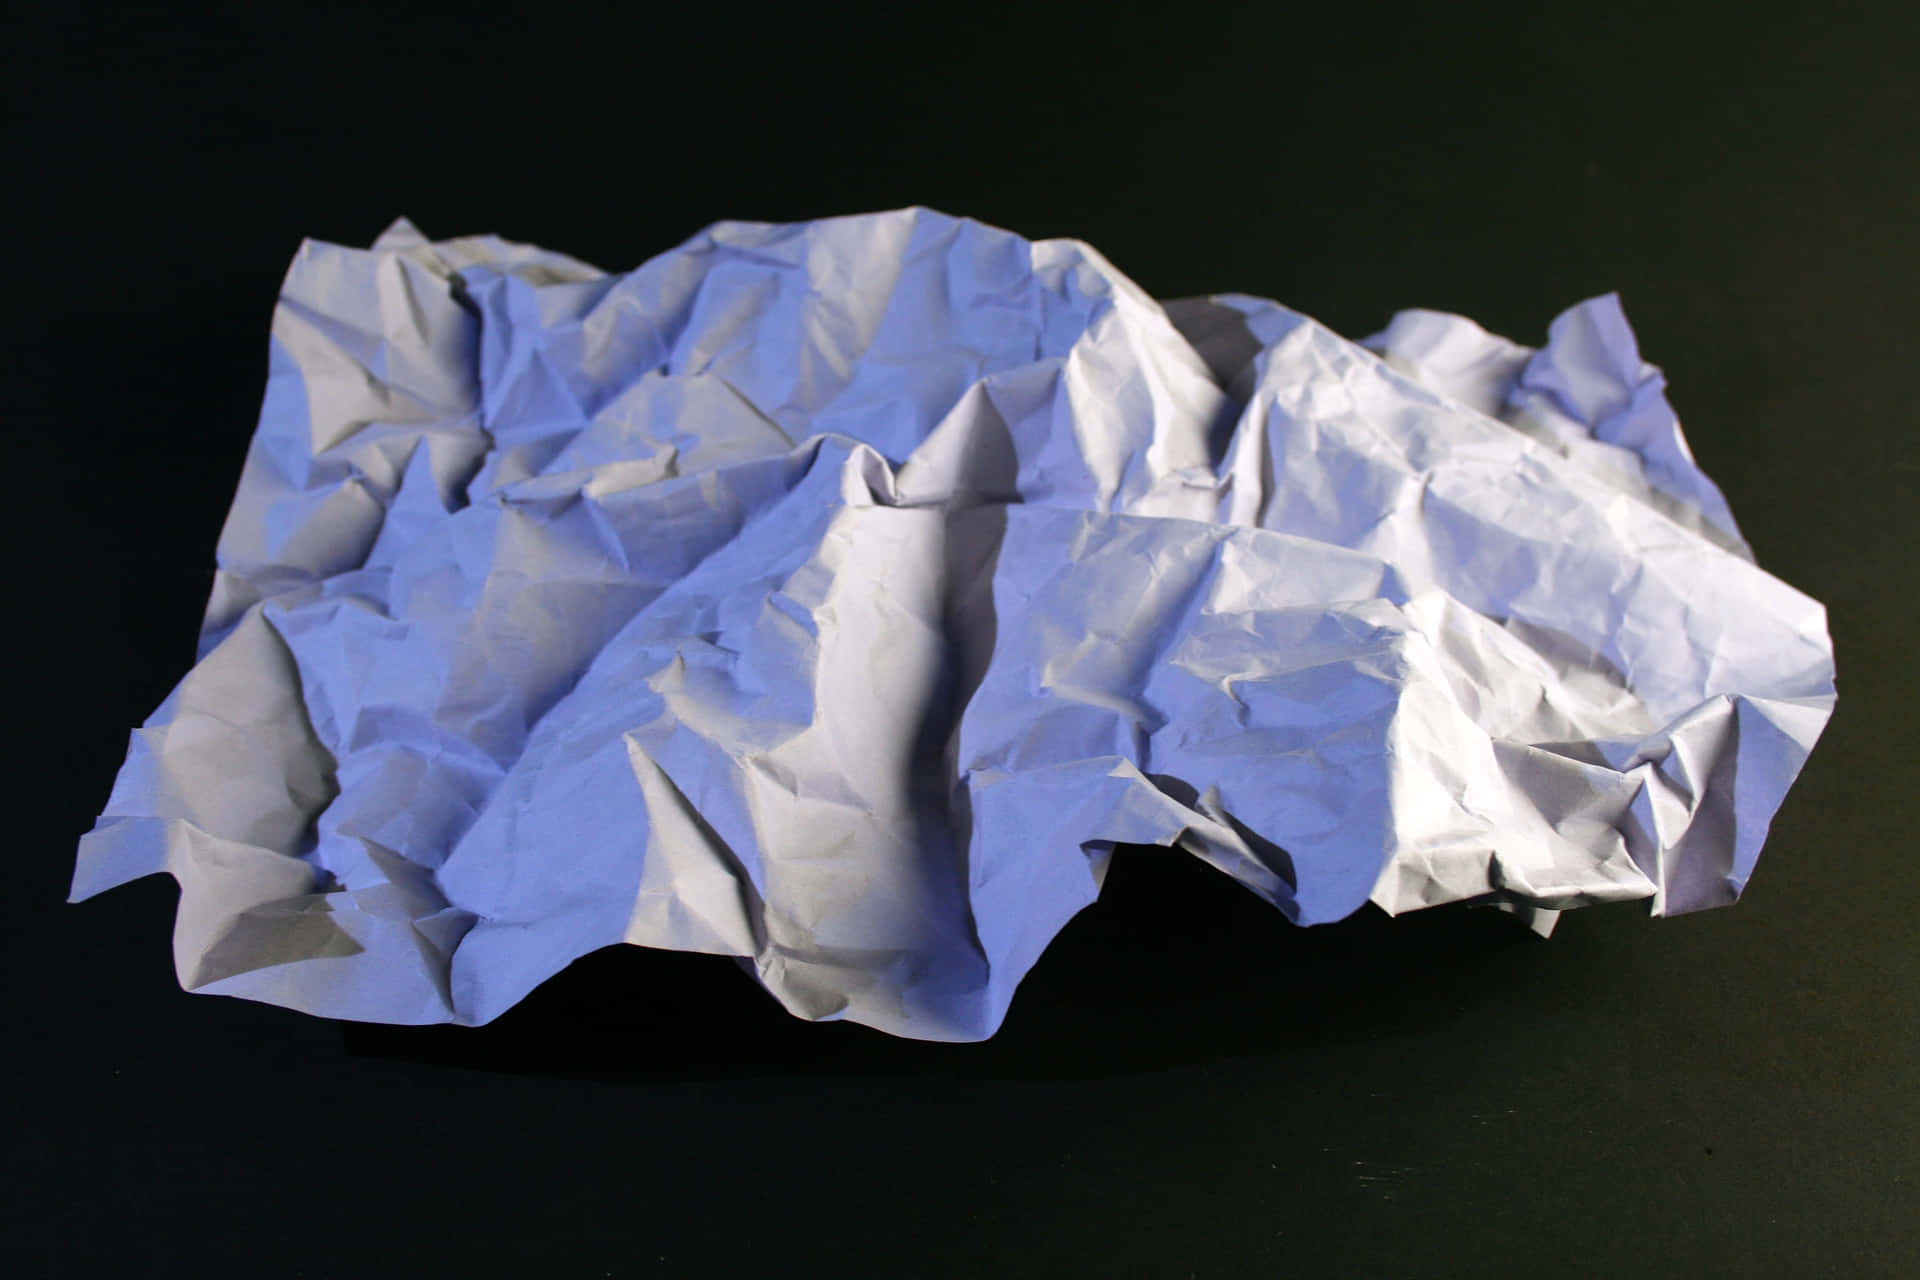 A crumpled paper background in blue showing the unique texture and lines of the paper's form.